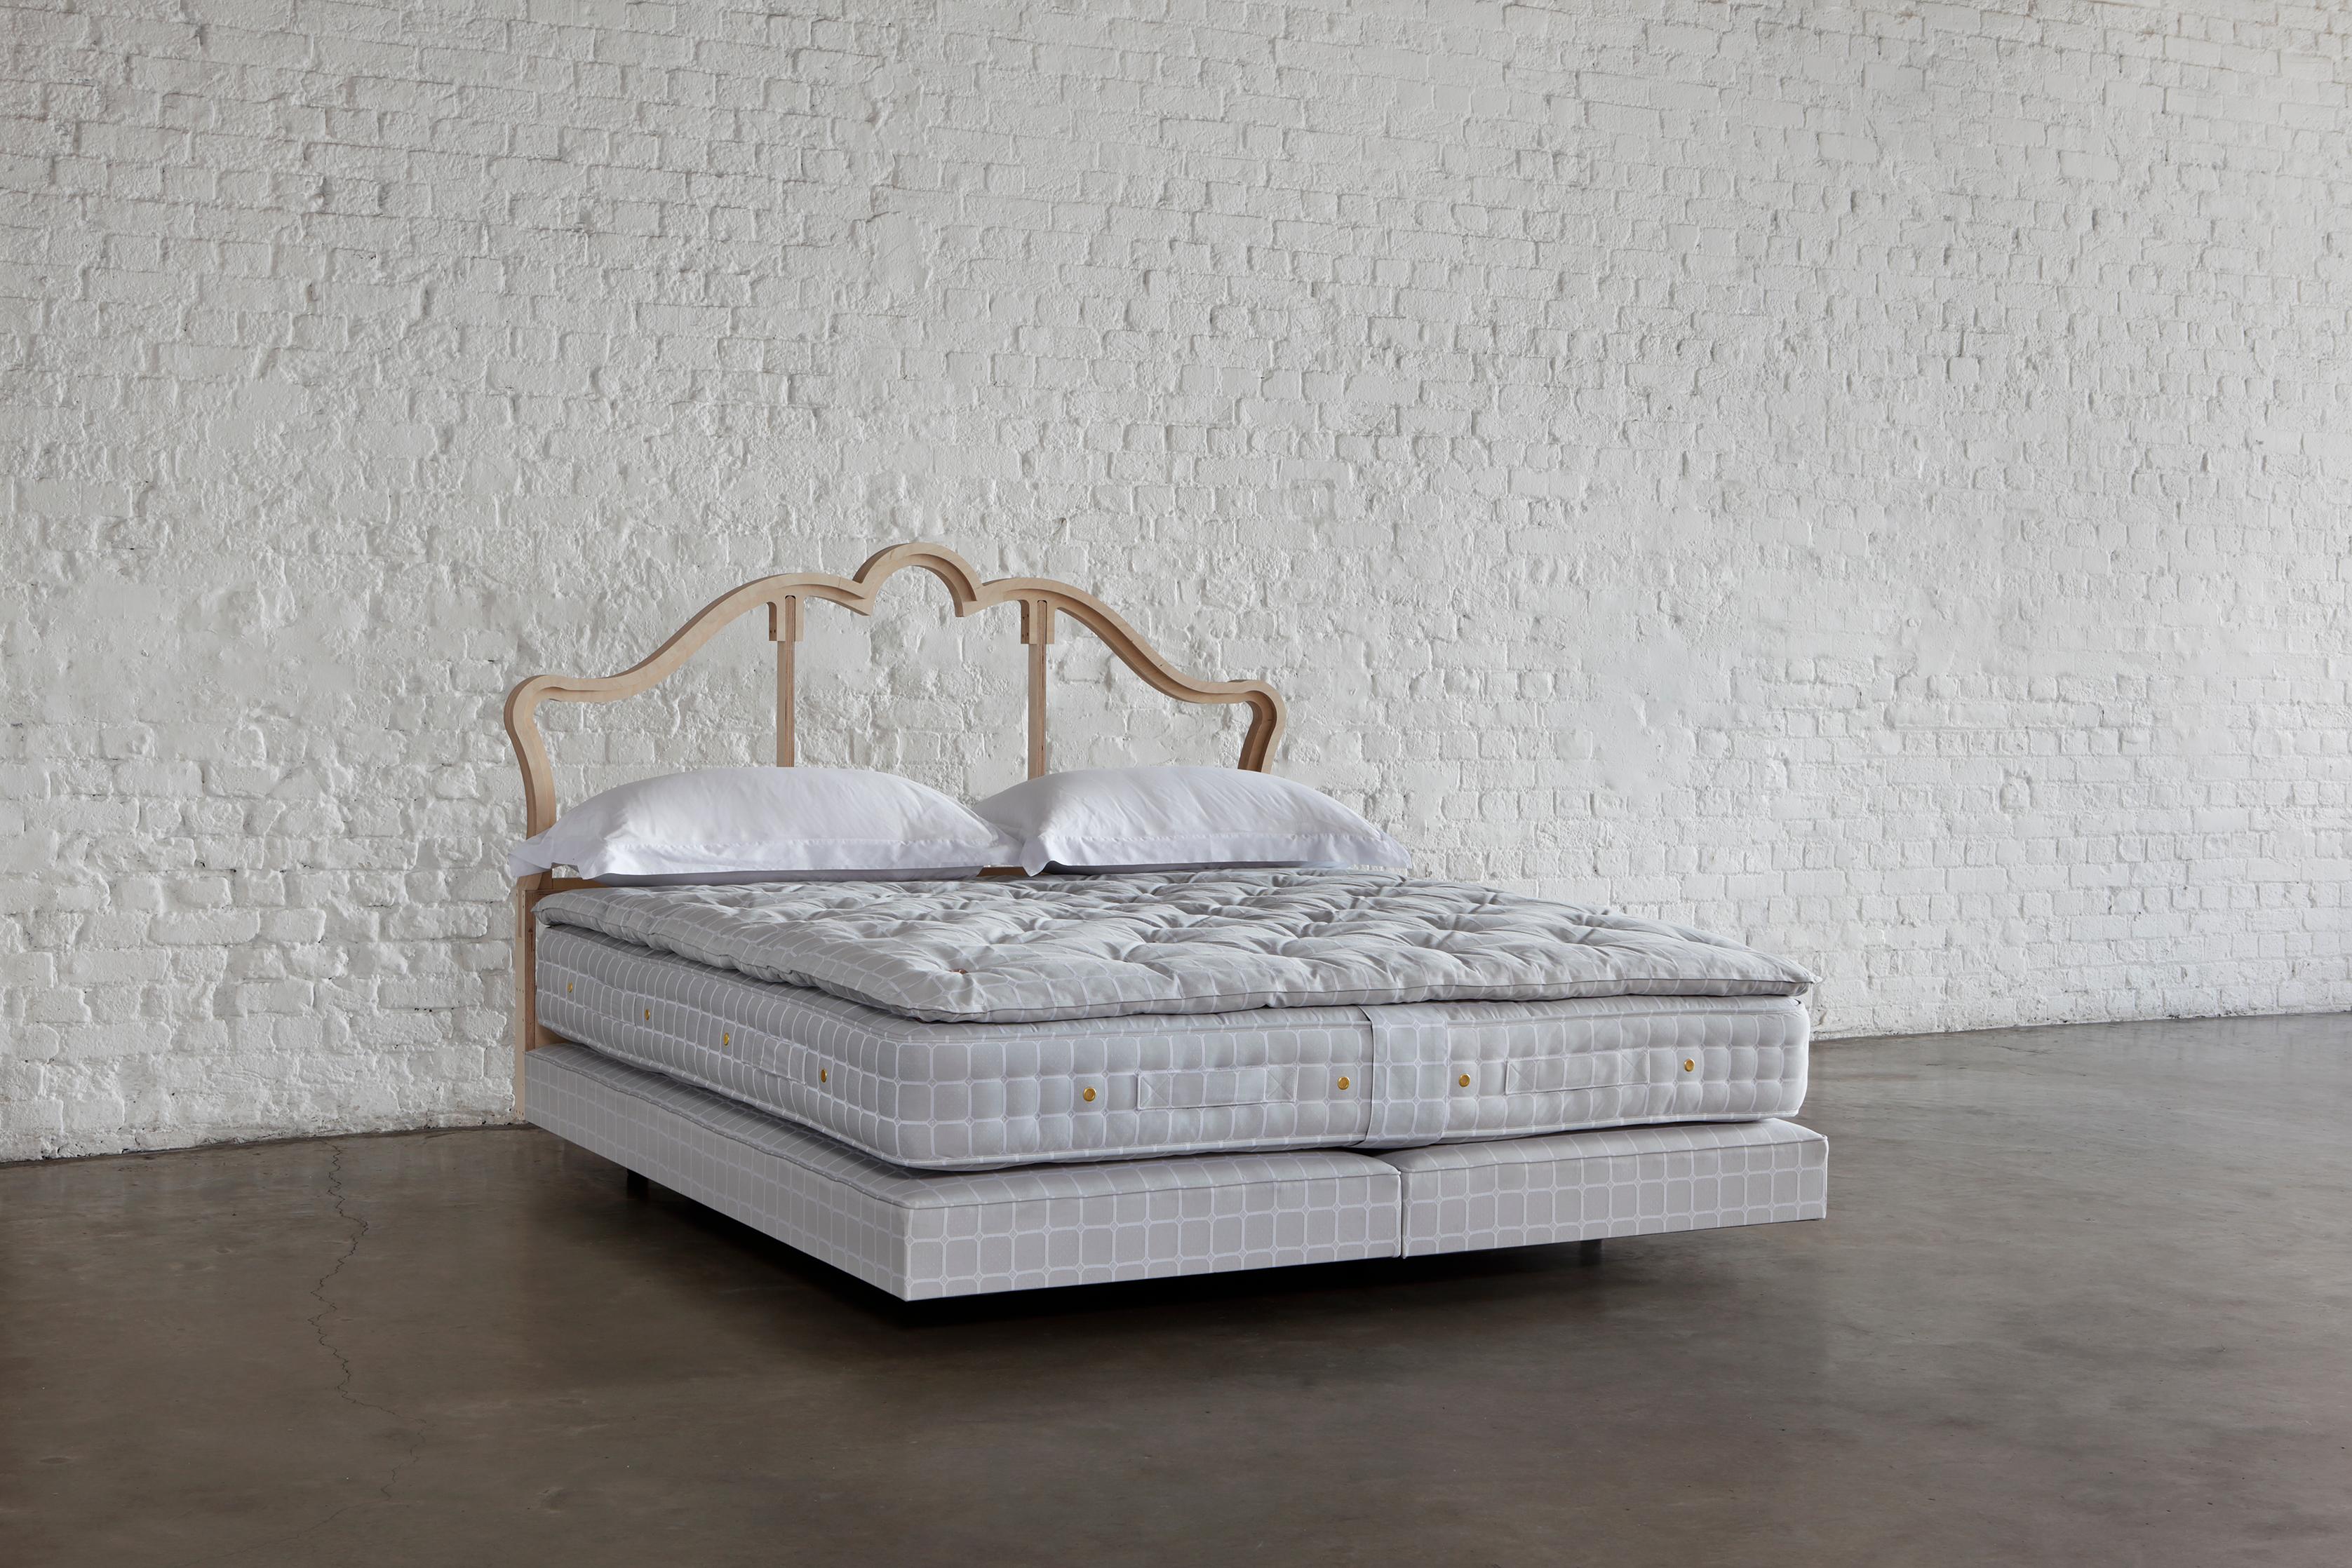 Uniting Savoir's time-honoured craftsmanship with ingredients harvested from nature, The Reformer is our vegan wonder bed. Certified by The Vegan Society, this variation on our Nº4 is created from the very finest plant-based materials and responds